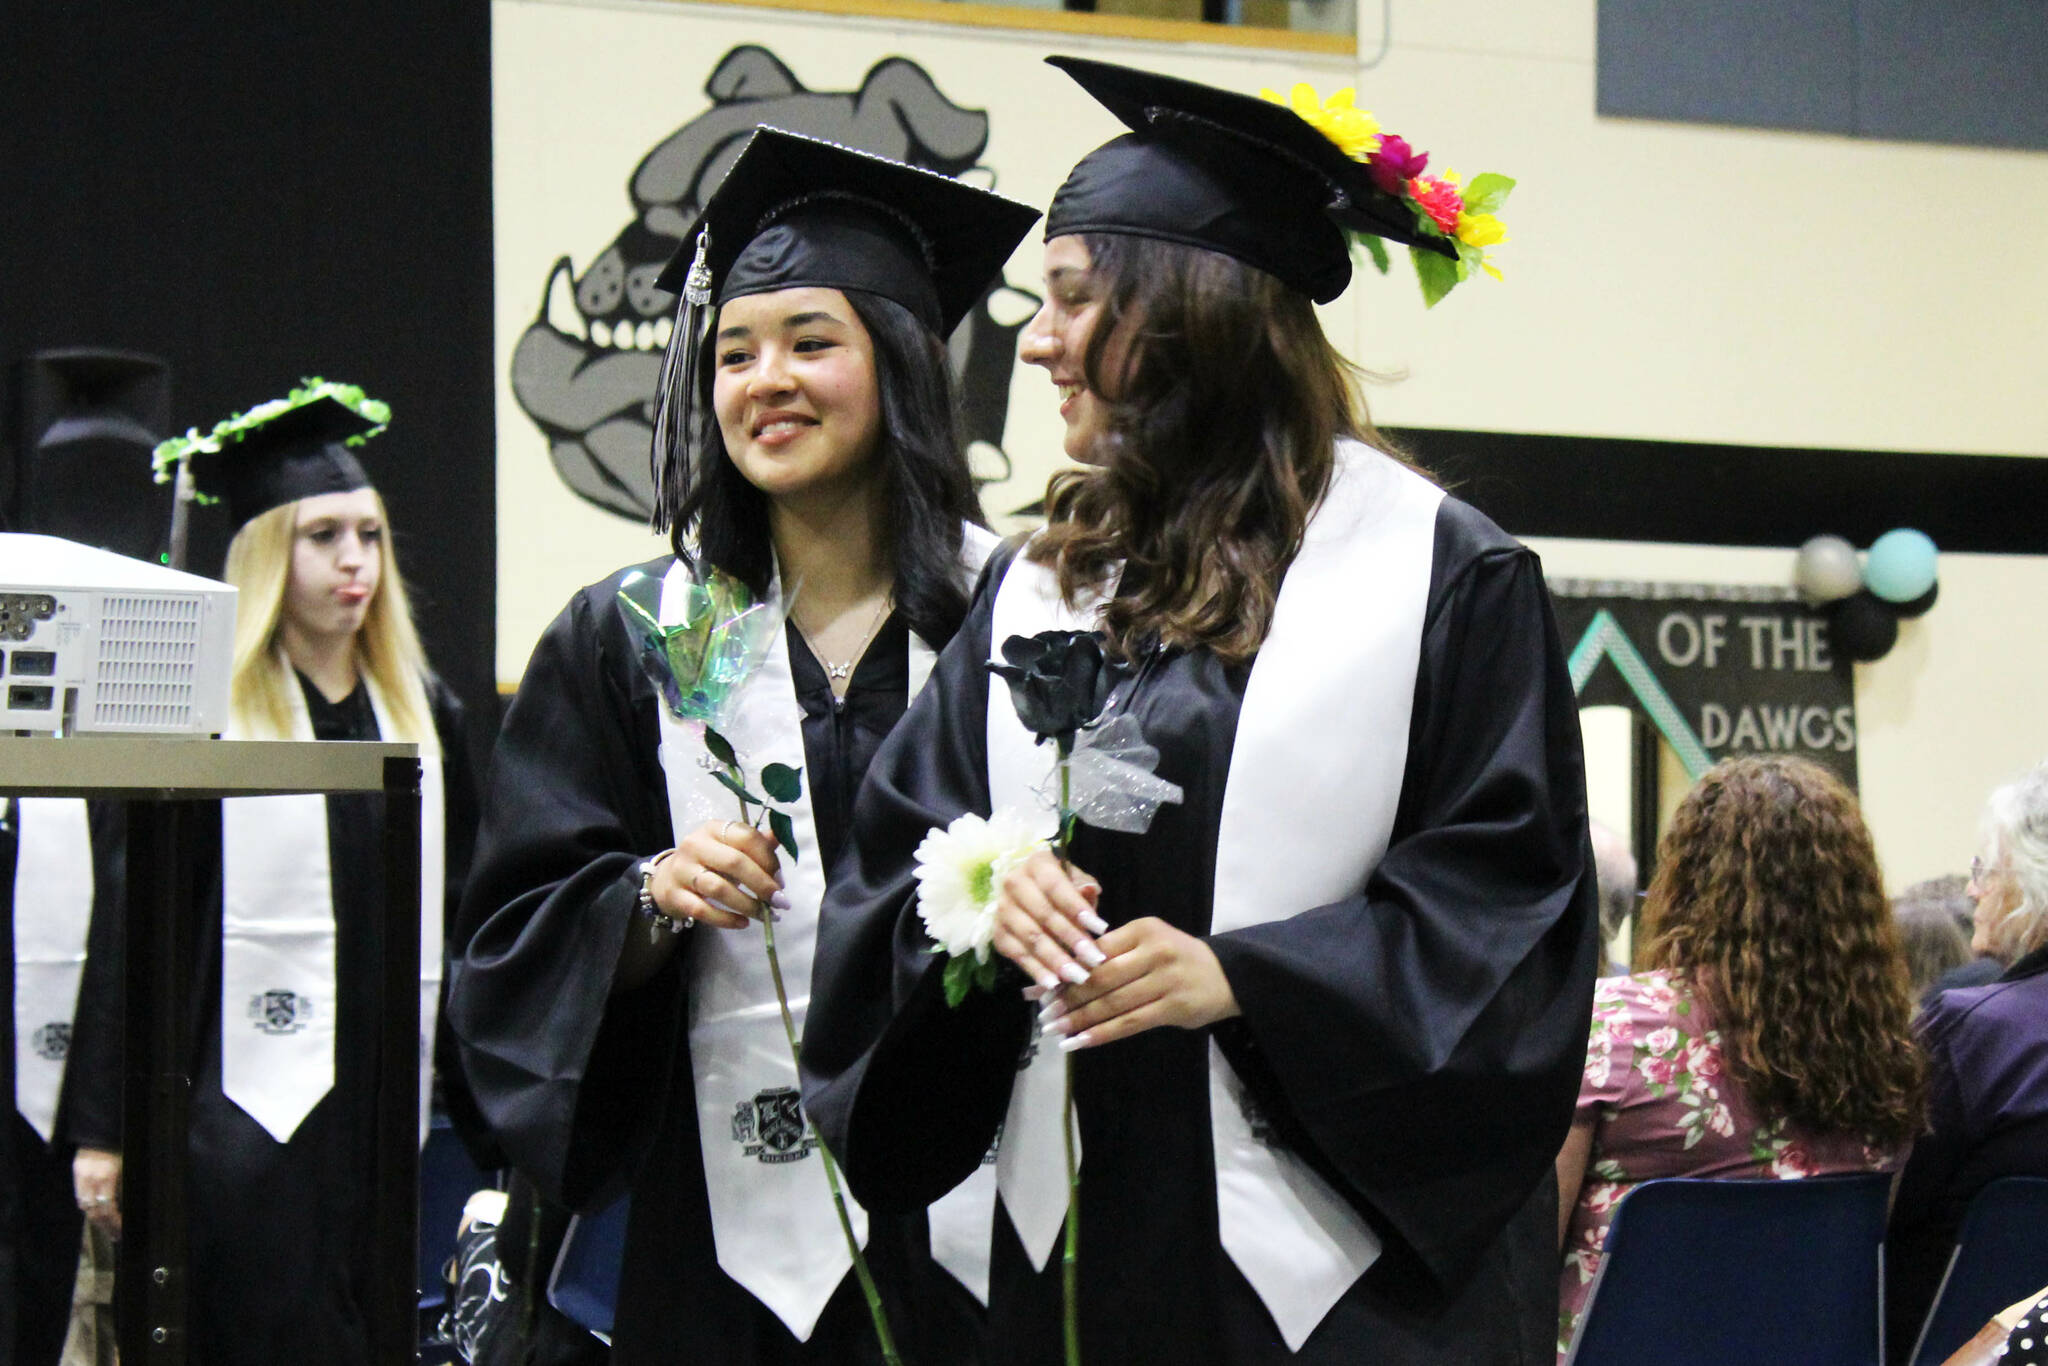 Nikiski Middle/High School graduates present roses to their loved ones during a ceremony on Tuesday, May 16, 2023 in Nikiski, Alaska. (Ashlyn O’Hara/Peninsula Clarion)